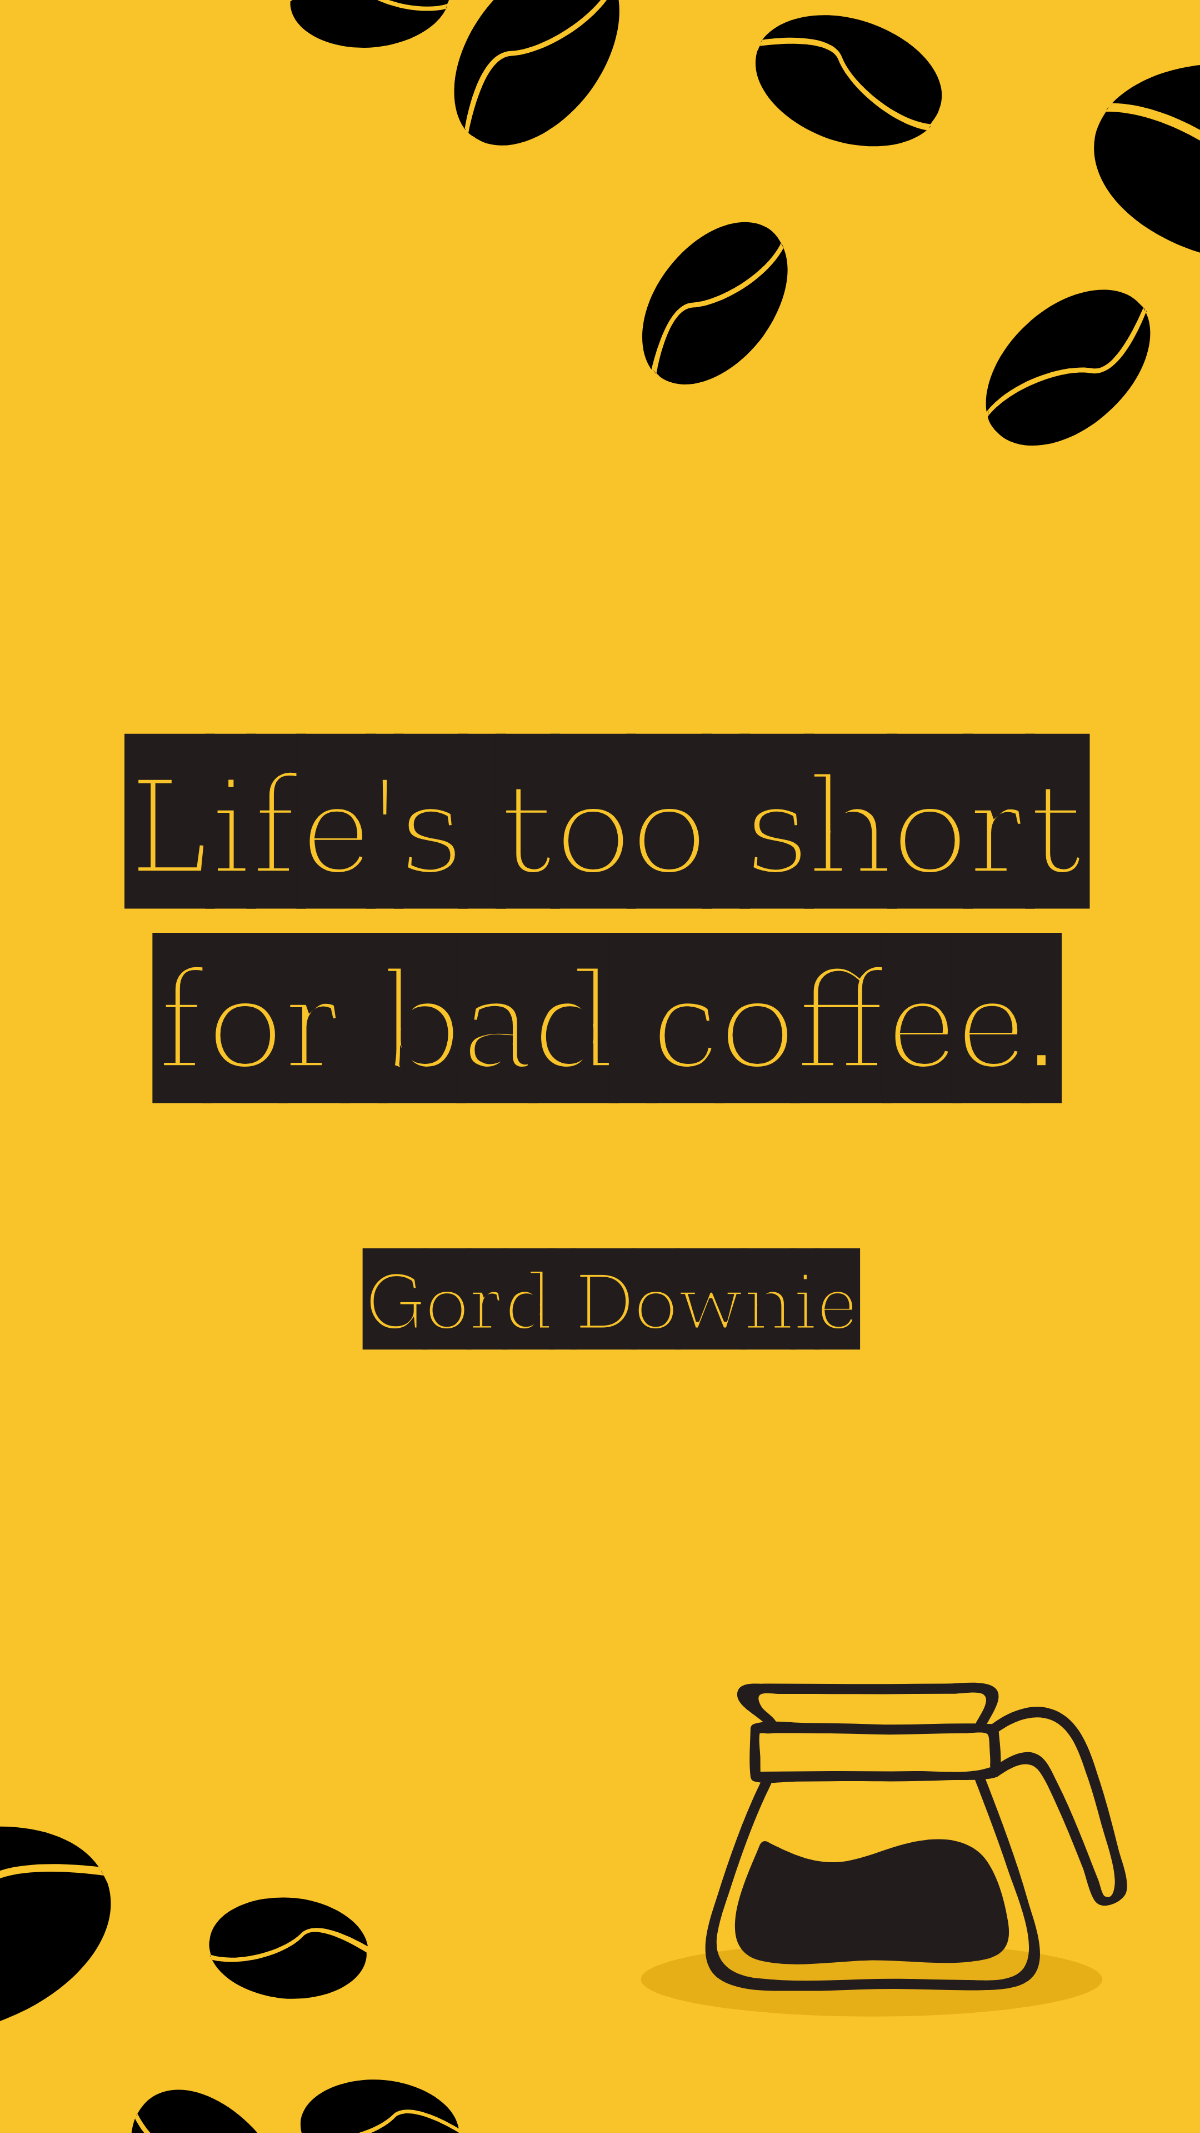 Gord Downie - Life's too short for bad coffee. Template